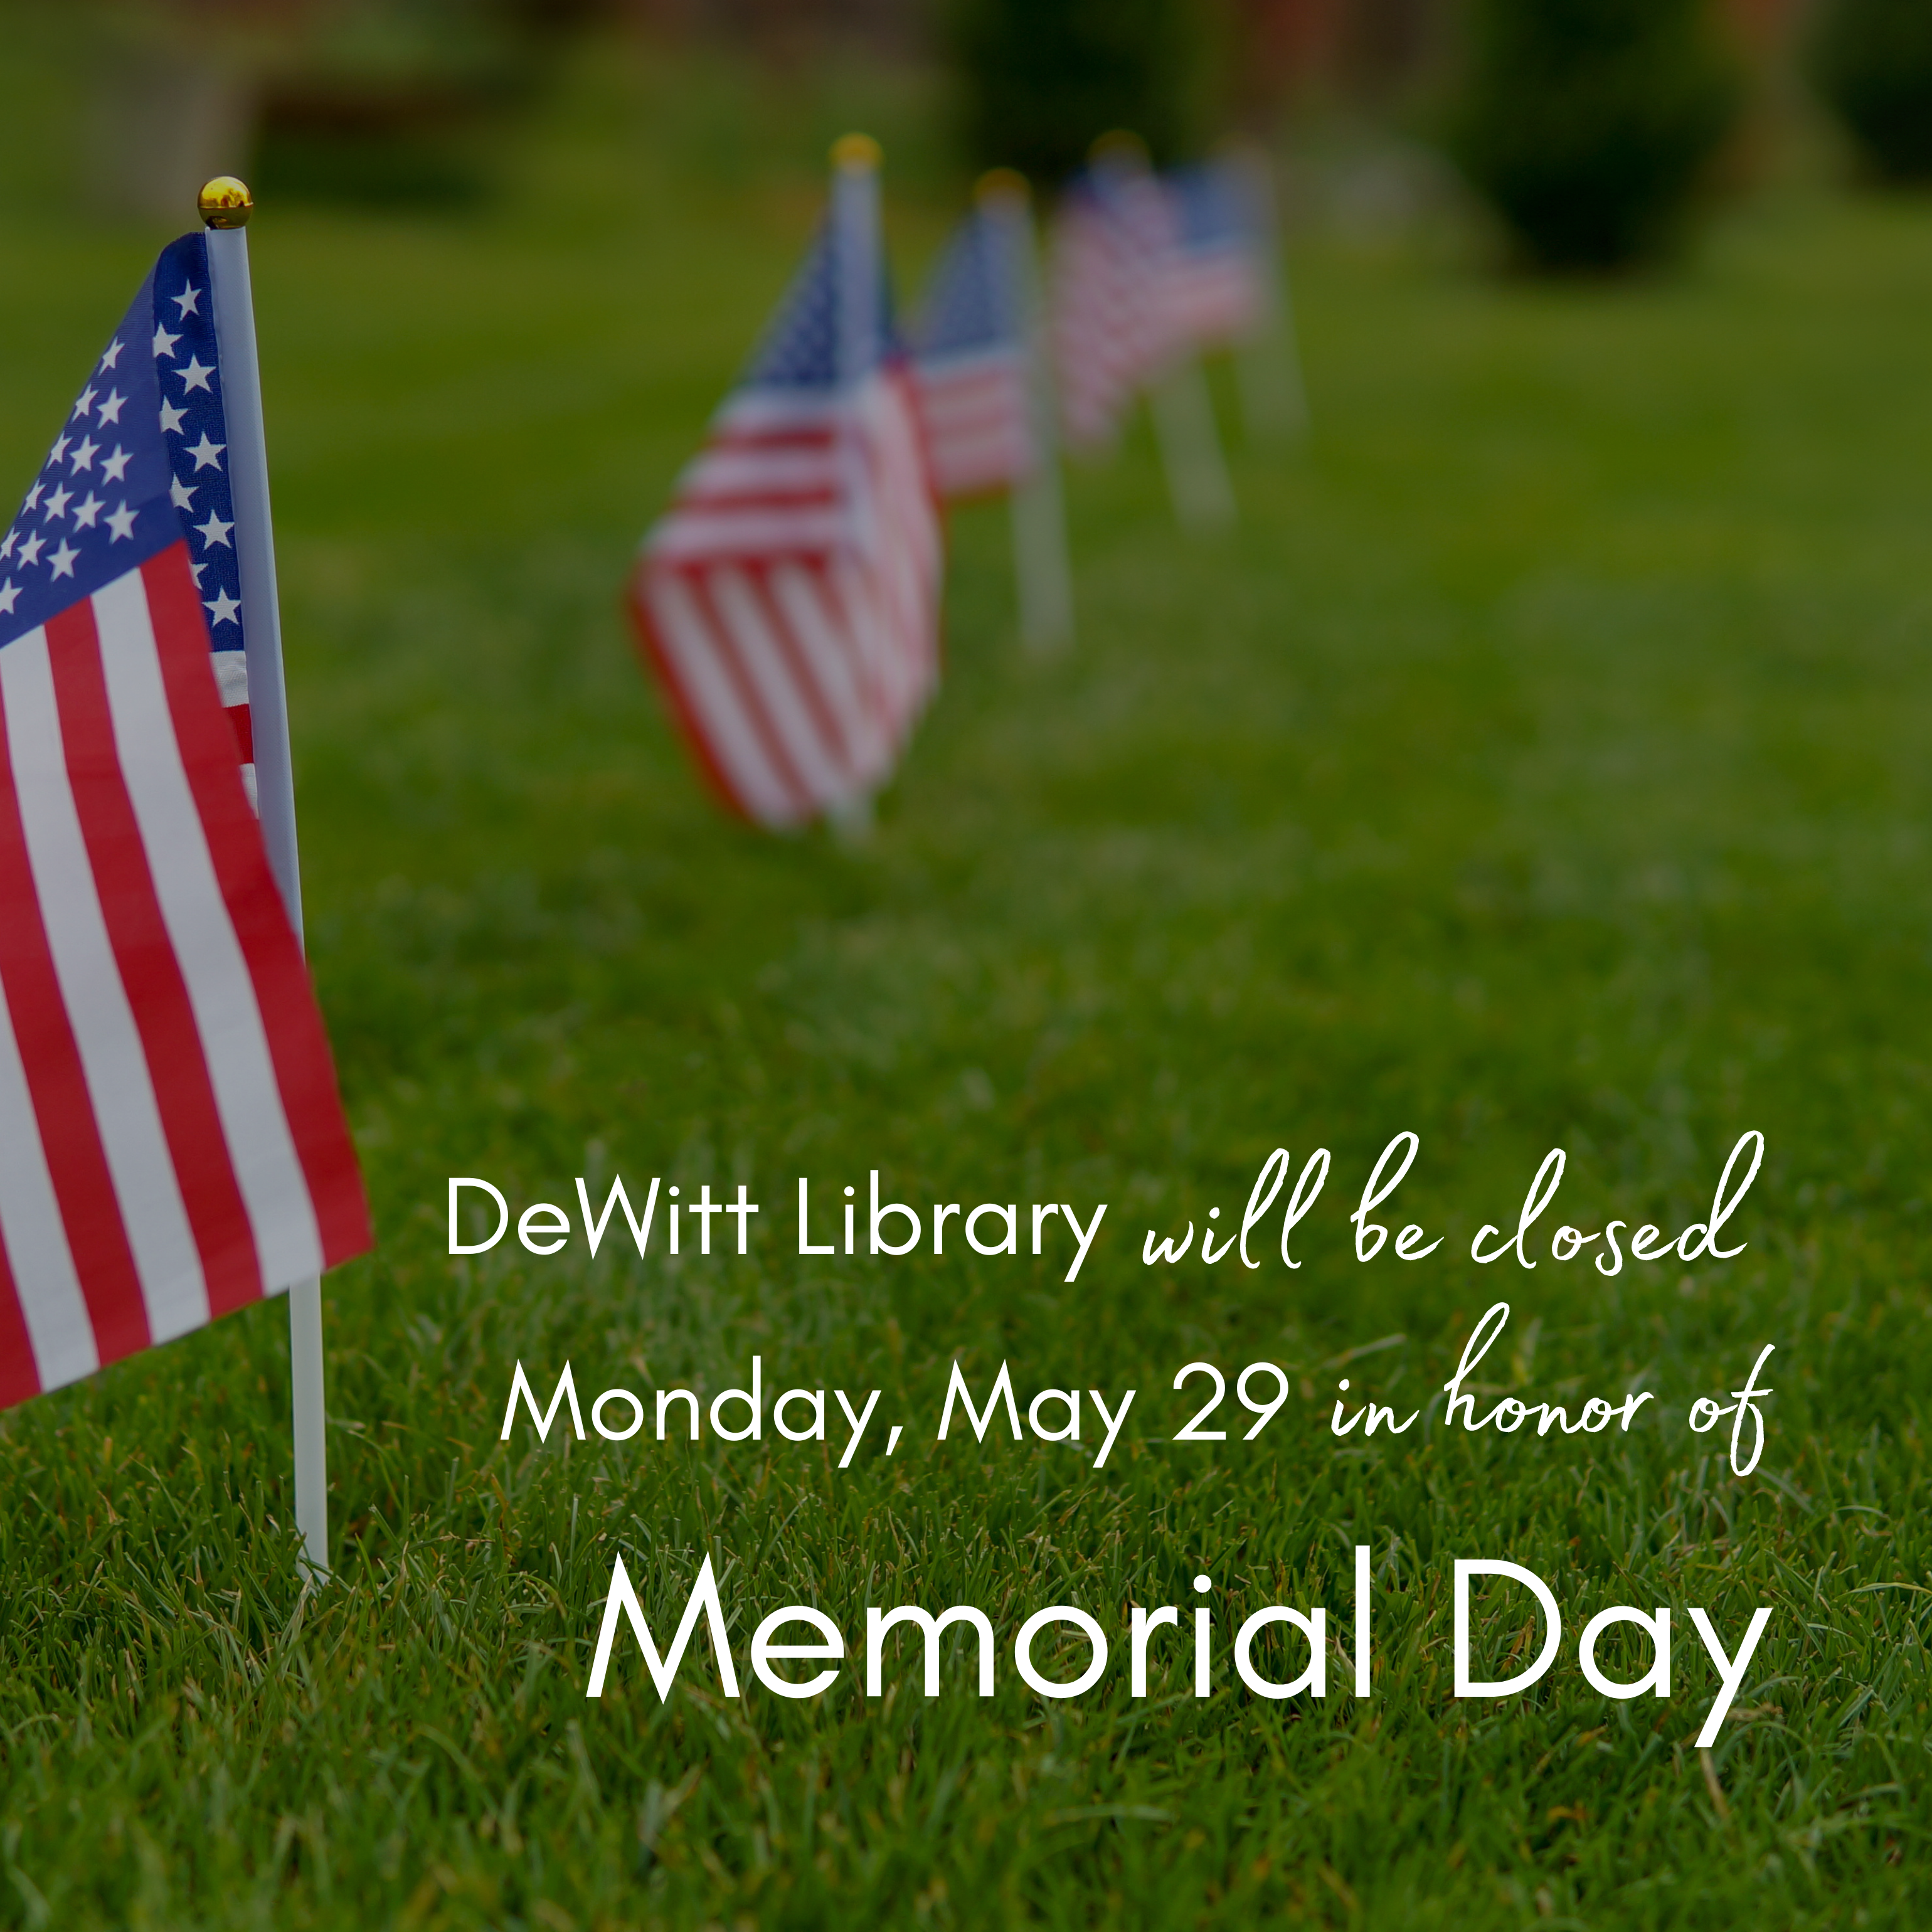 DeWitt Library will be closed Monday, May 29 in honor of Memorial Day.